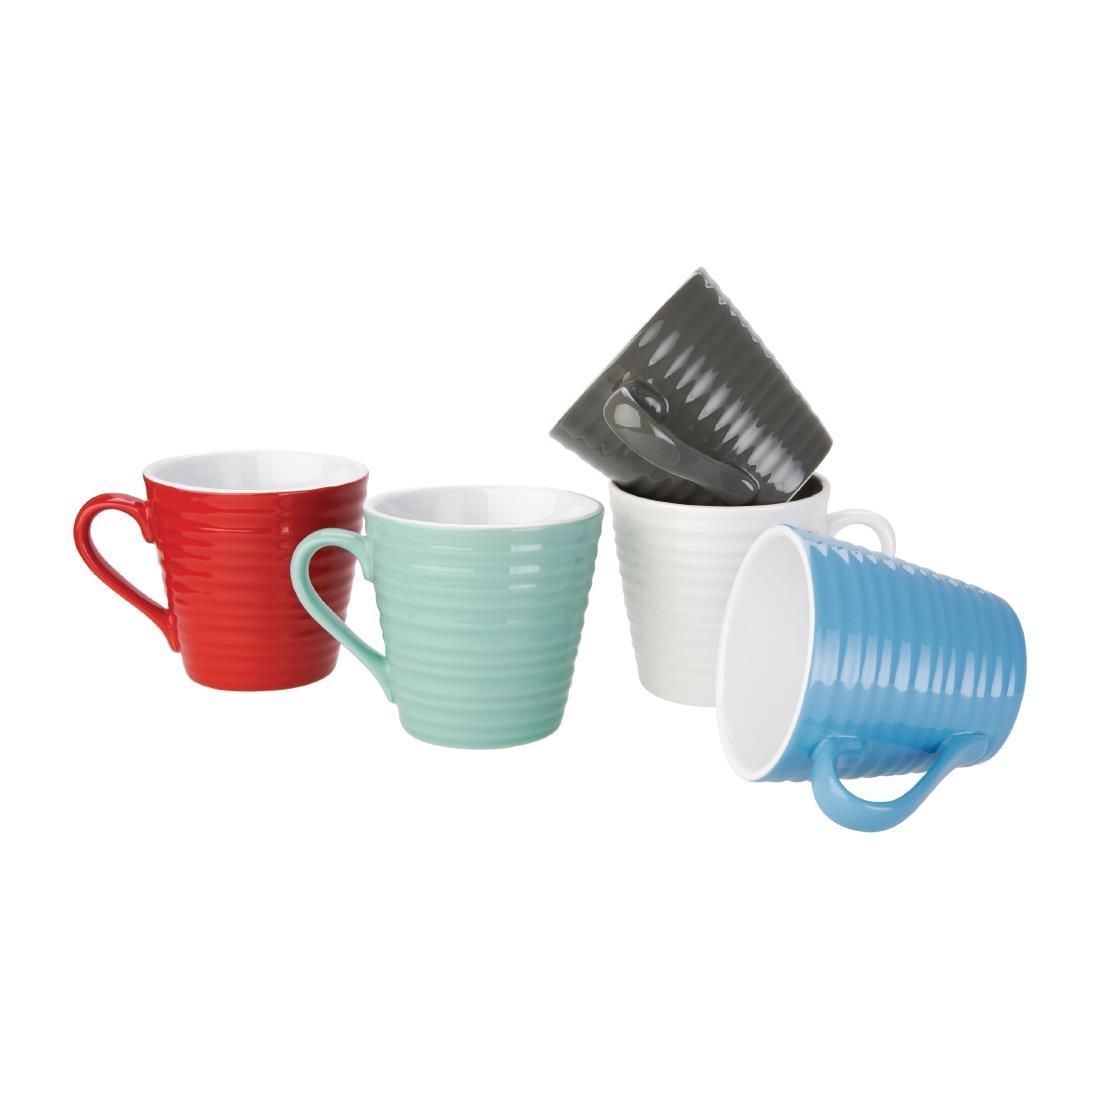 Olympia Café Aroma Mugs White 340ml (Pack of 6) - DH633  - 3